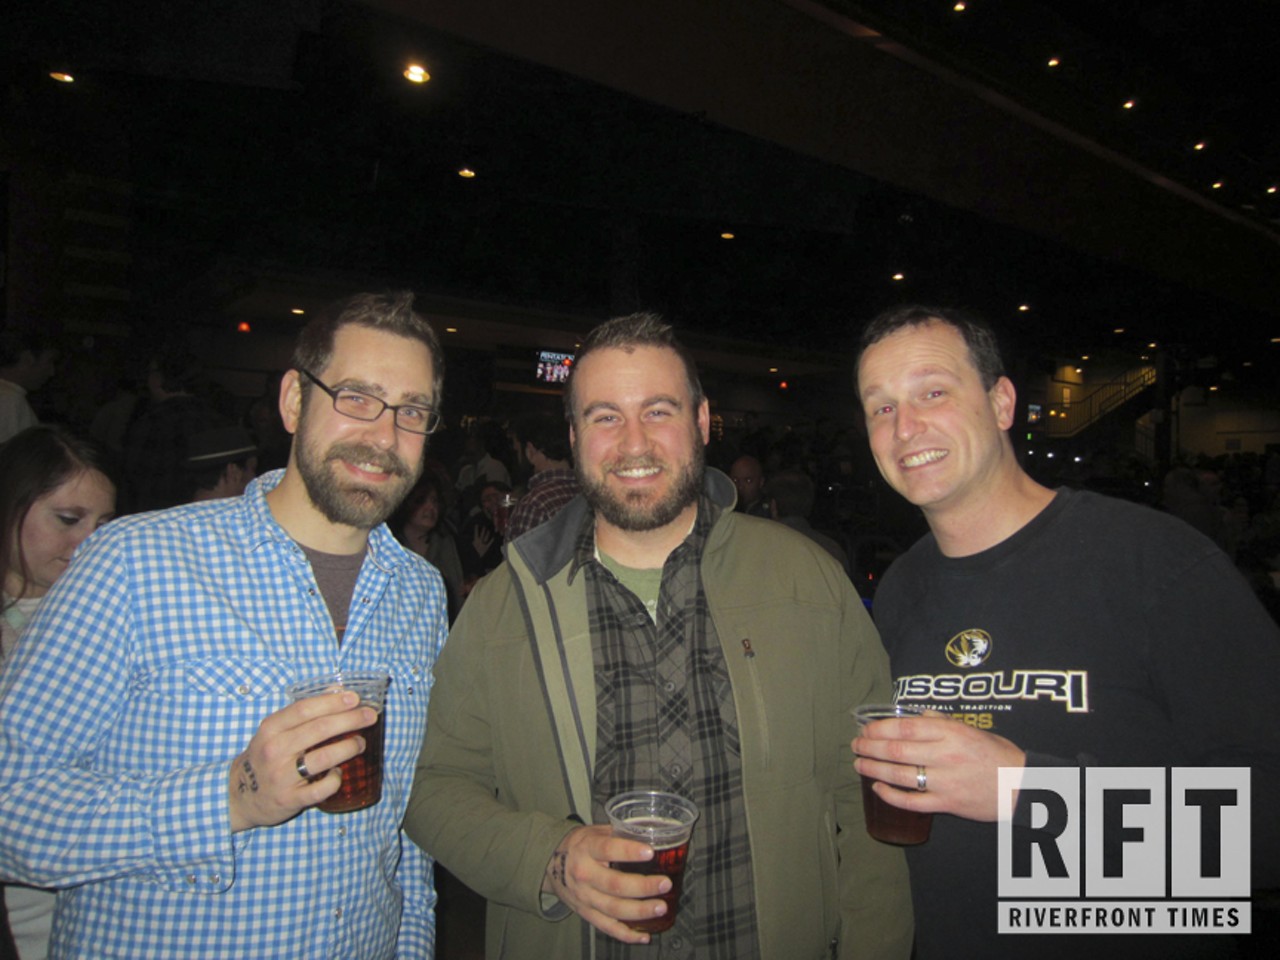 Schlafly 21st Anniversary Party